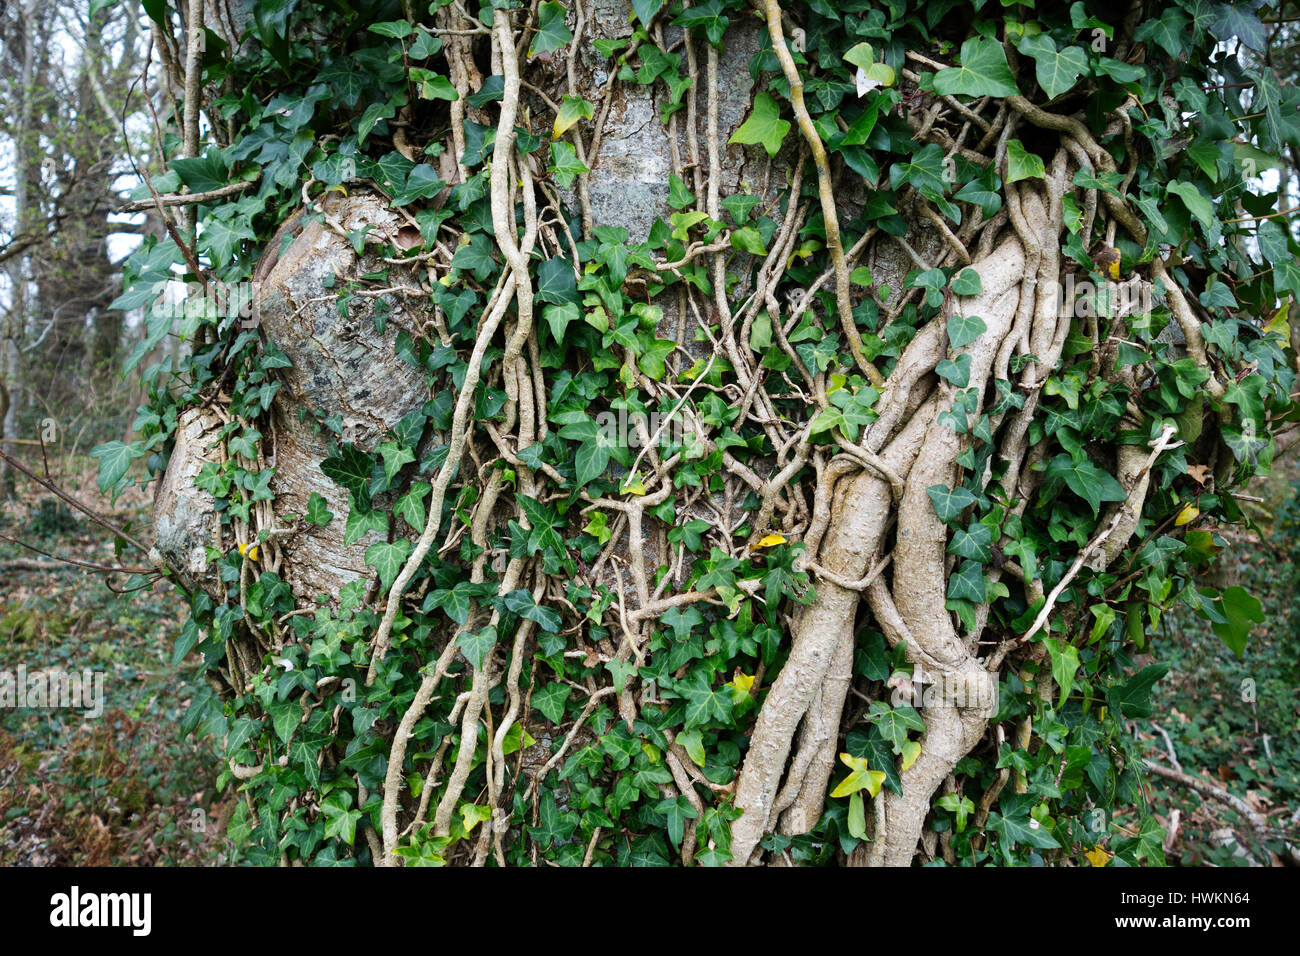 English Ivy, Hedera Helix, growing on trees in a woodland in england, uk. Stock Photo